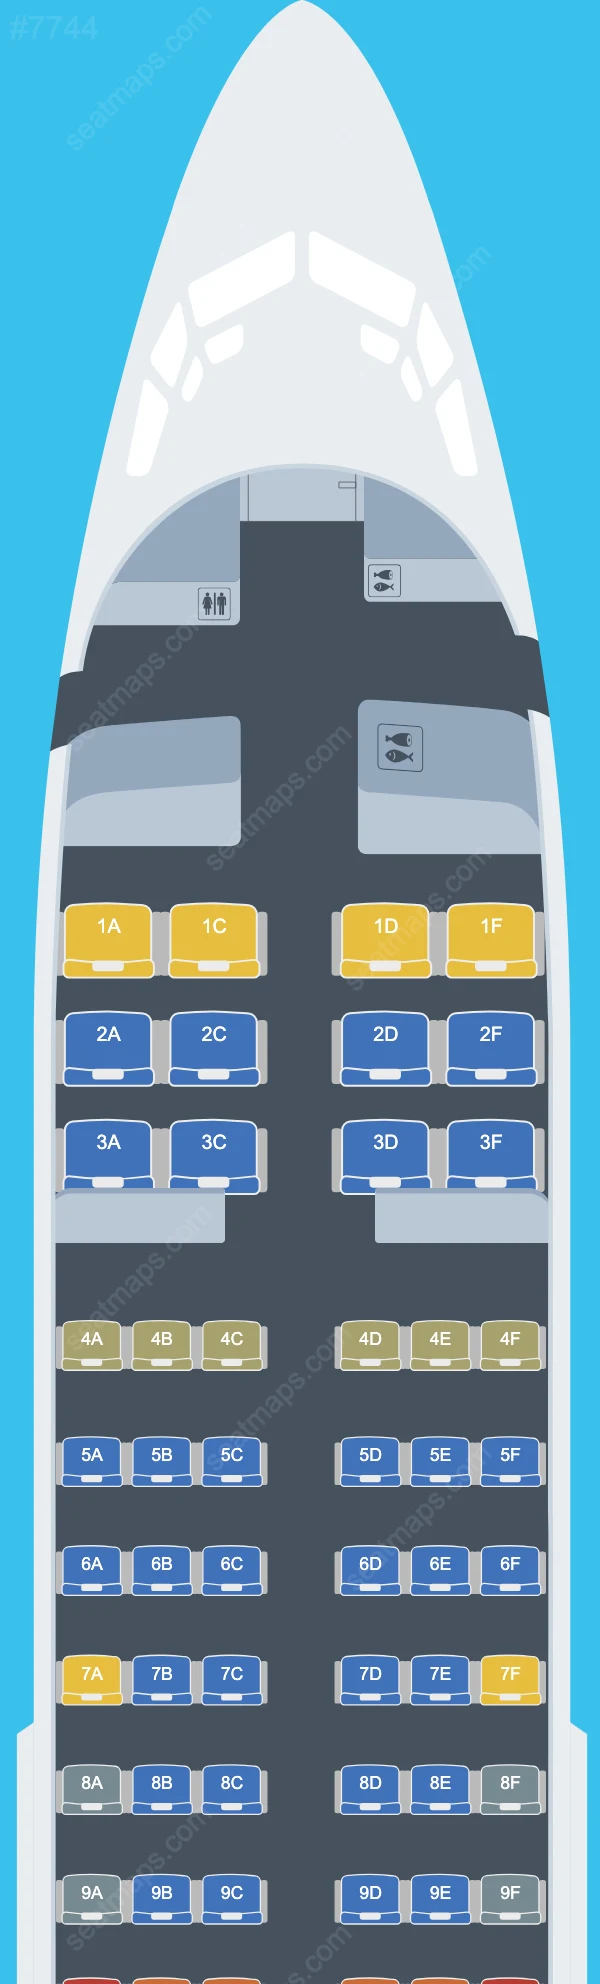 MIAT Mongolian Airlines Boeing 737 Seat Maps 737-700 V.2